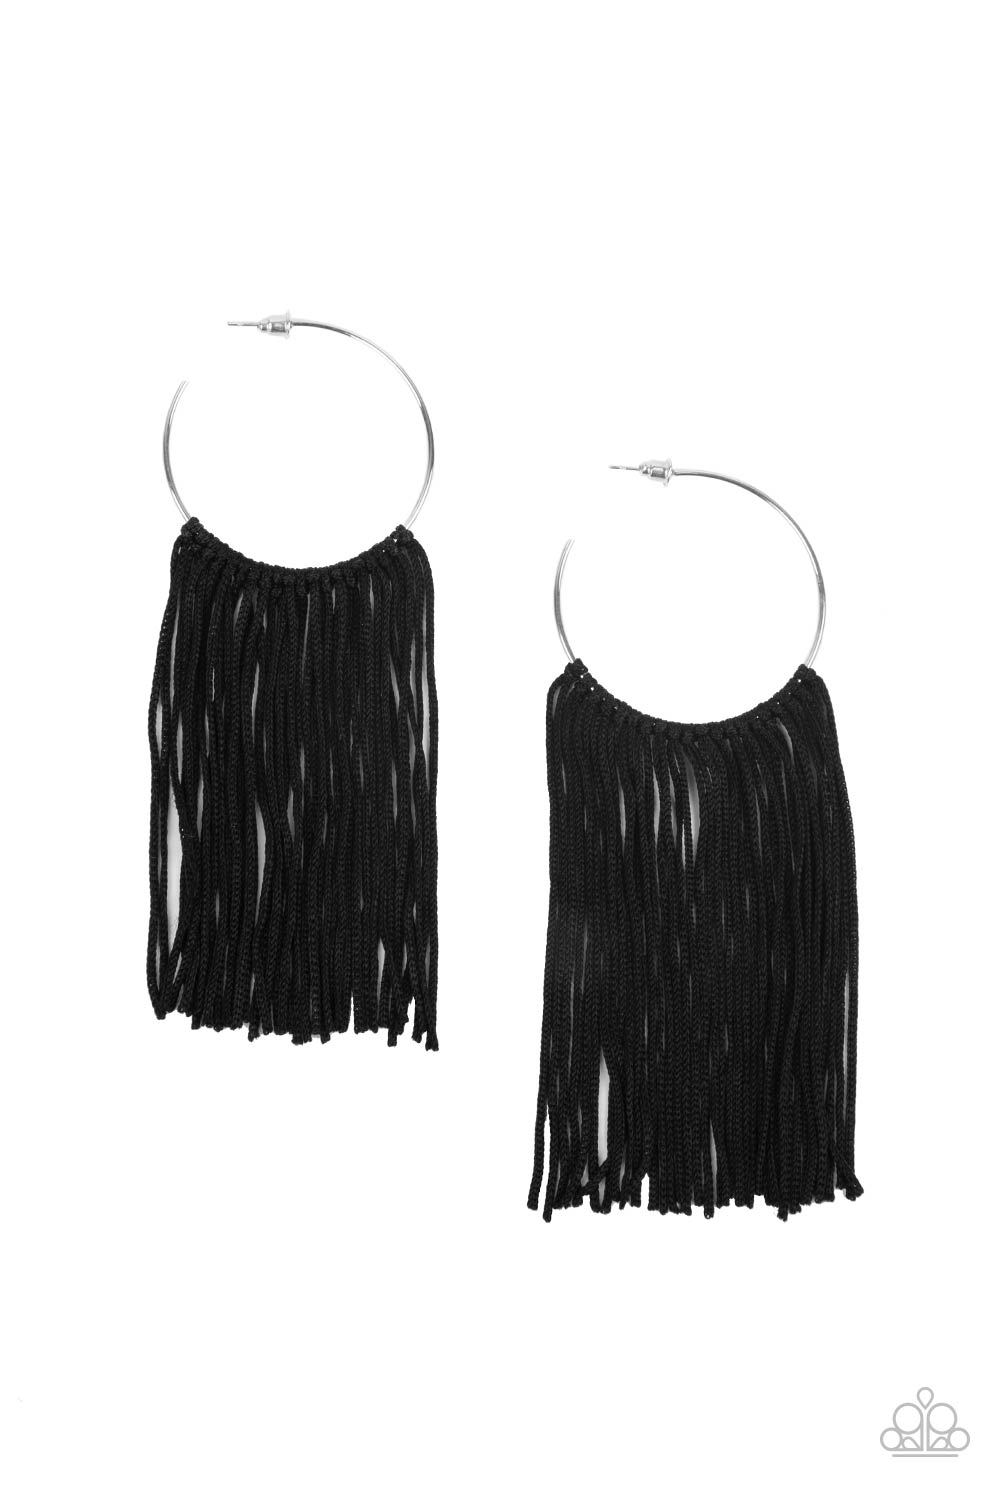 Flauntable Fringe - Black ***COMING SOON*** - Bling With Crystal